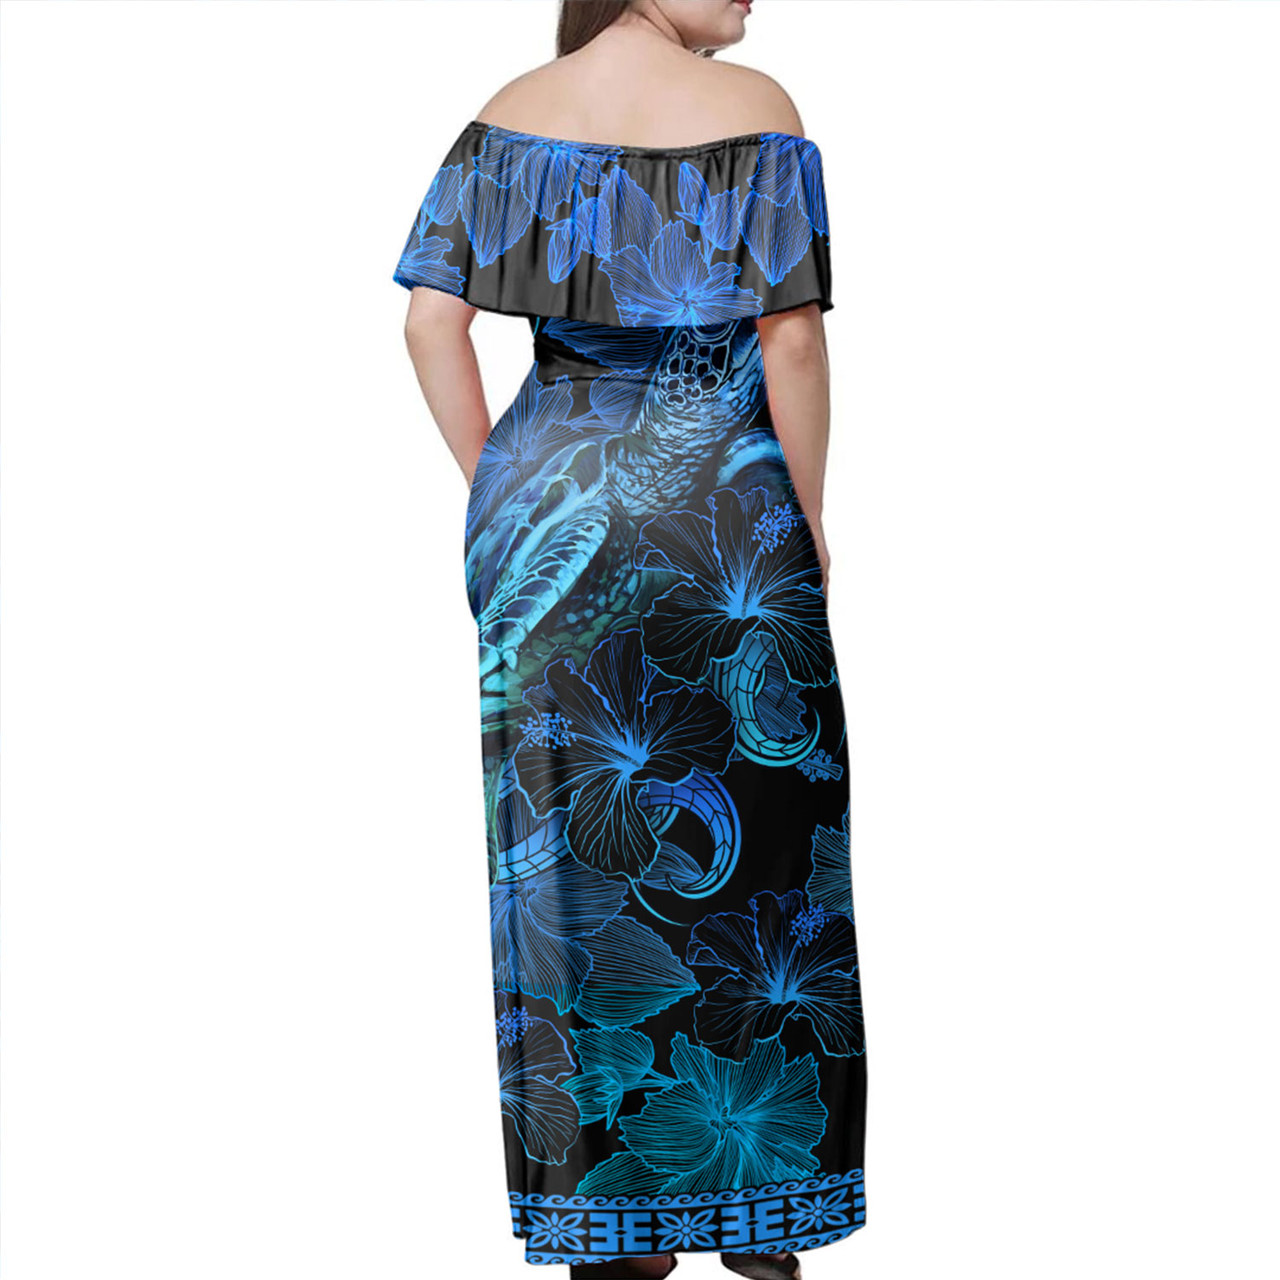 Hawaii Kanaka Maoli Combo Off Shoulder Long Dress And Shirt Sea Turtle With Blooming Hibiscus Flowers Tribal Blue